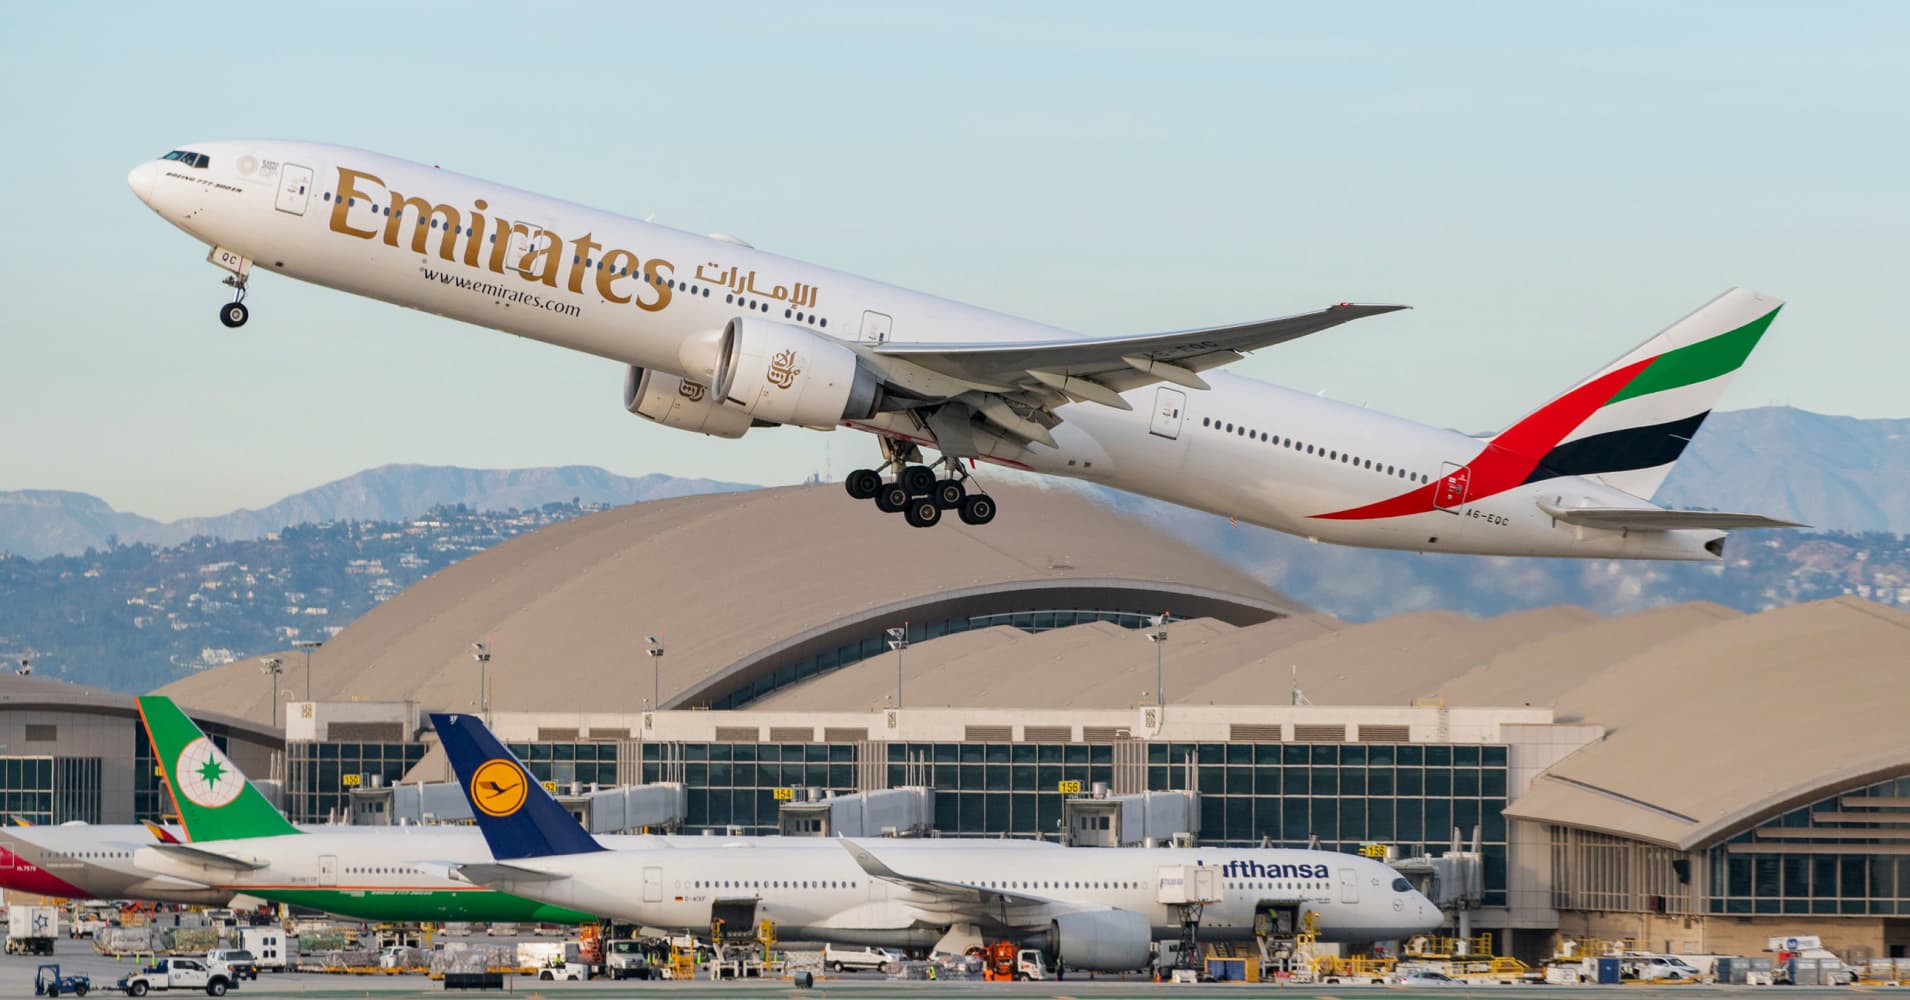 emirates' chairman has a message for boeing: 'get your act together'